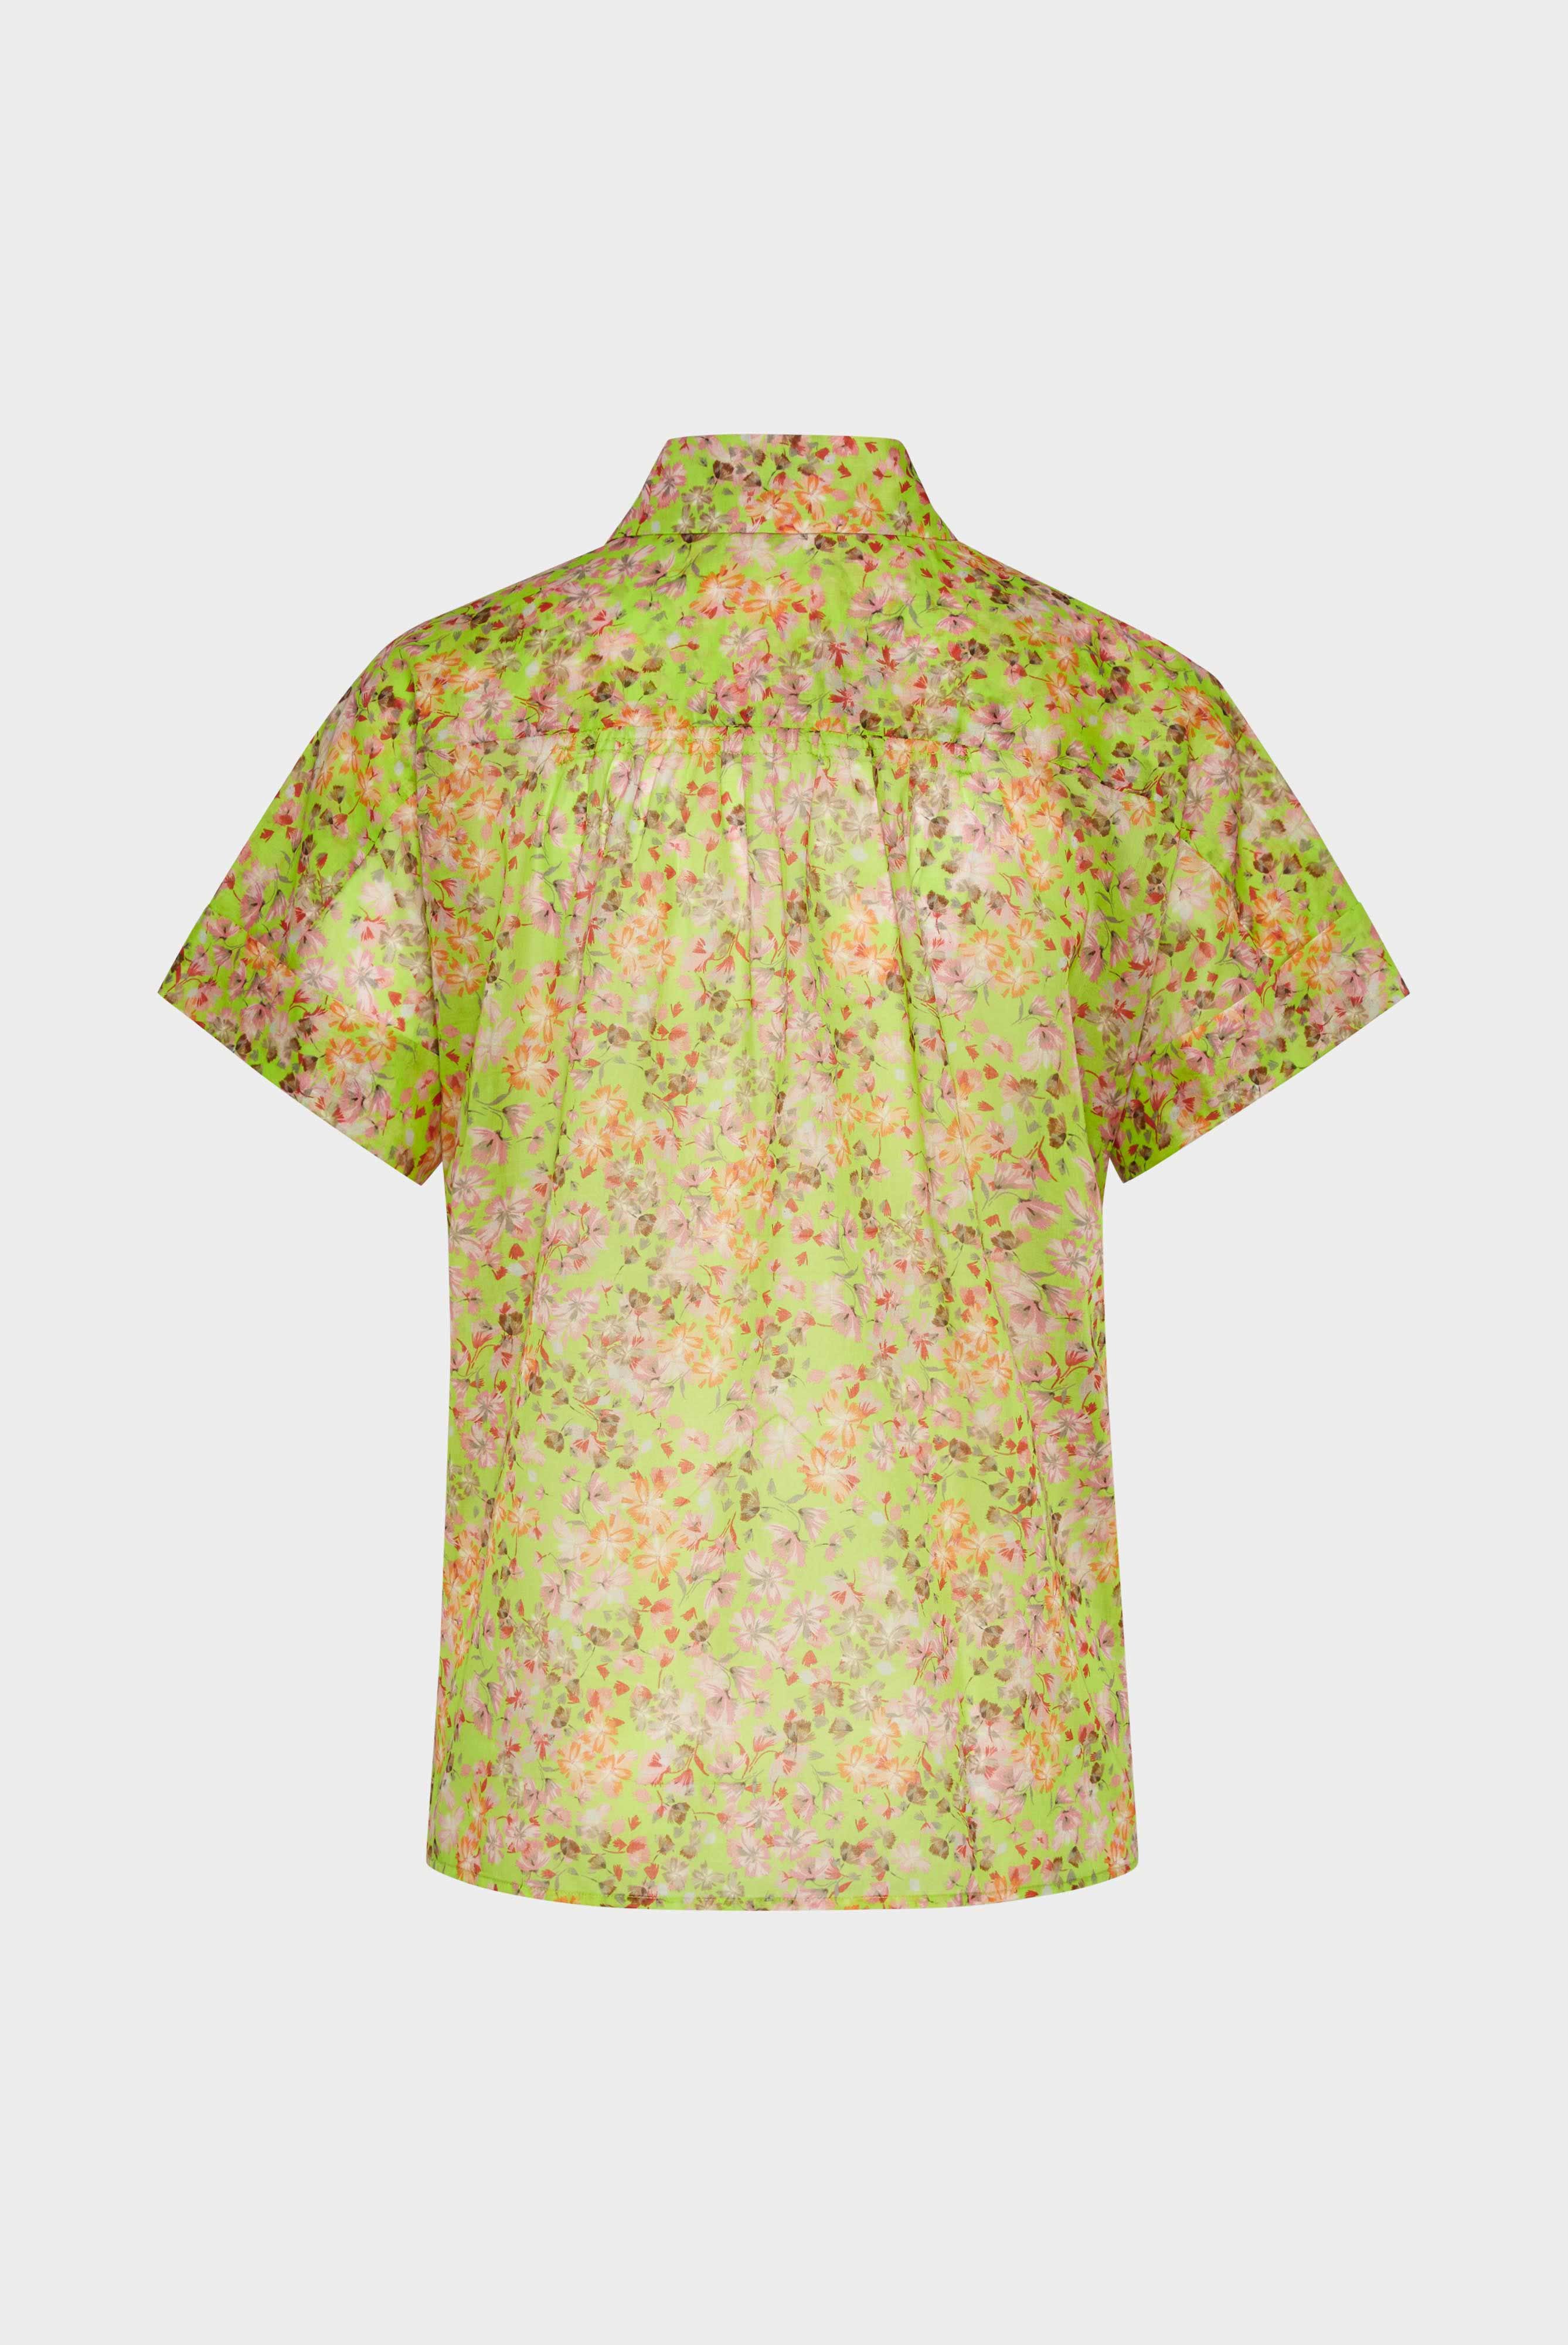 Casual Blouses+Cotton Short-Sleeved Shirt with Floral Print+05.525R.P8.170250.953.38